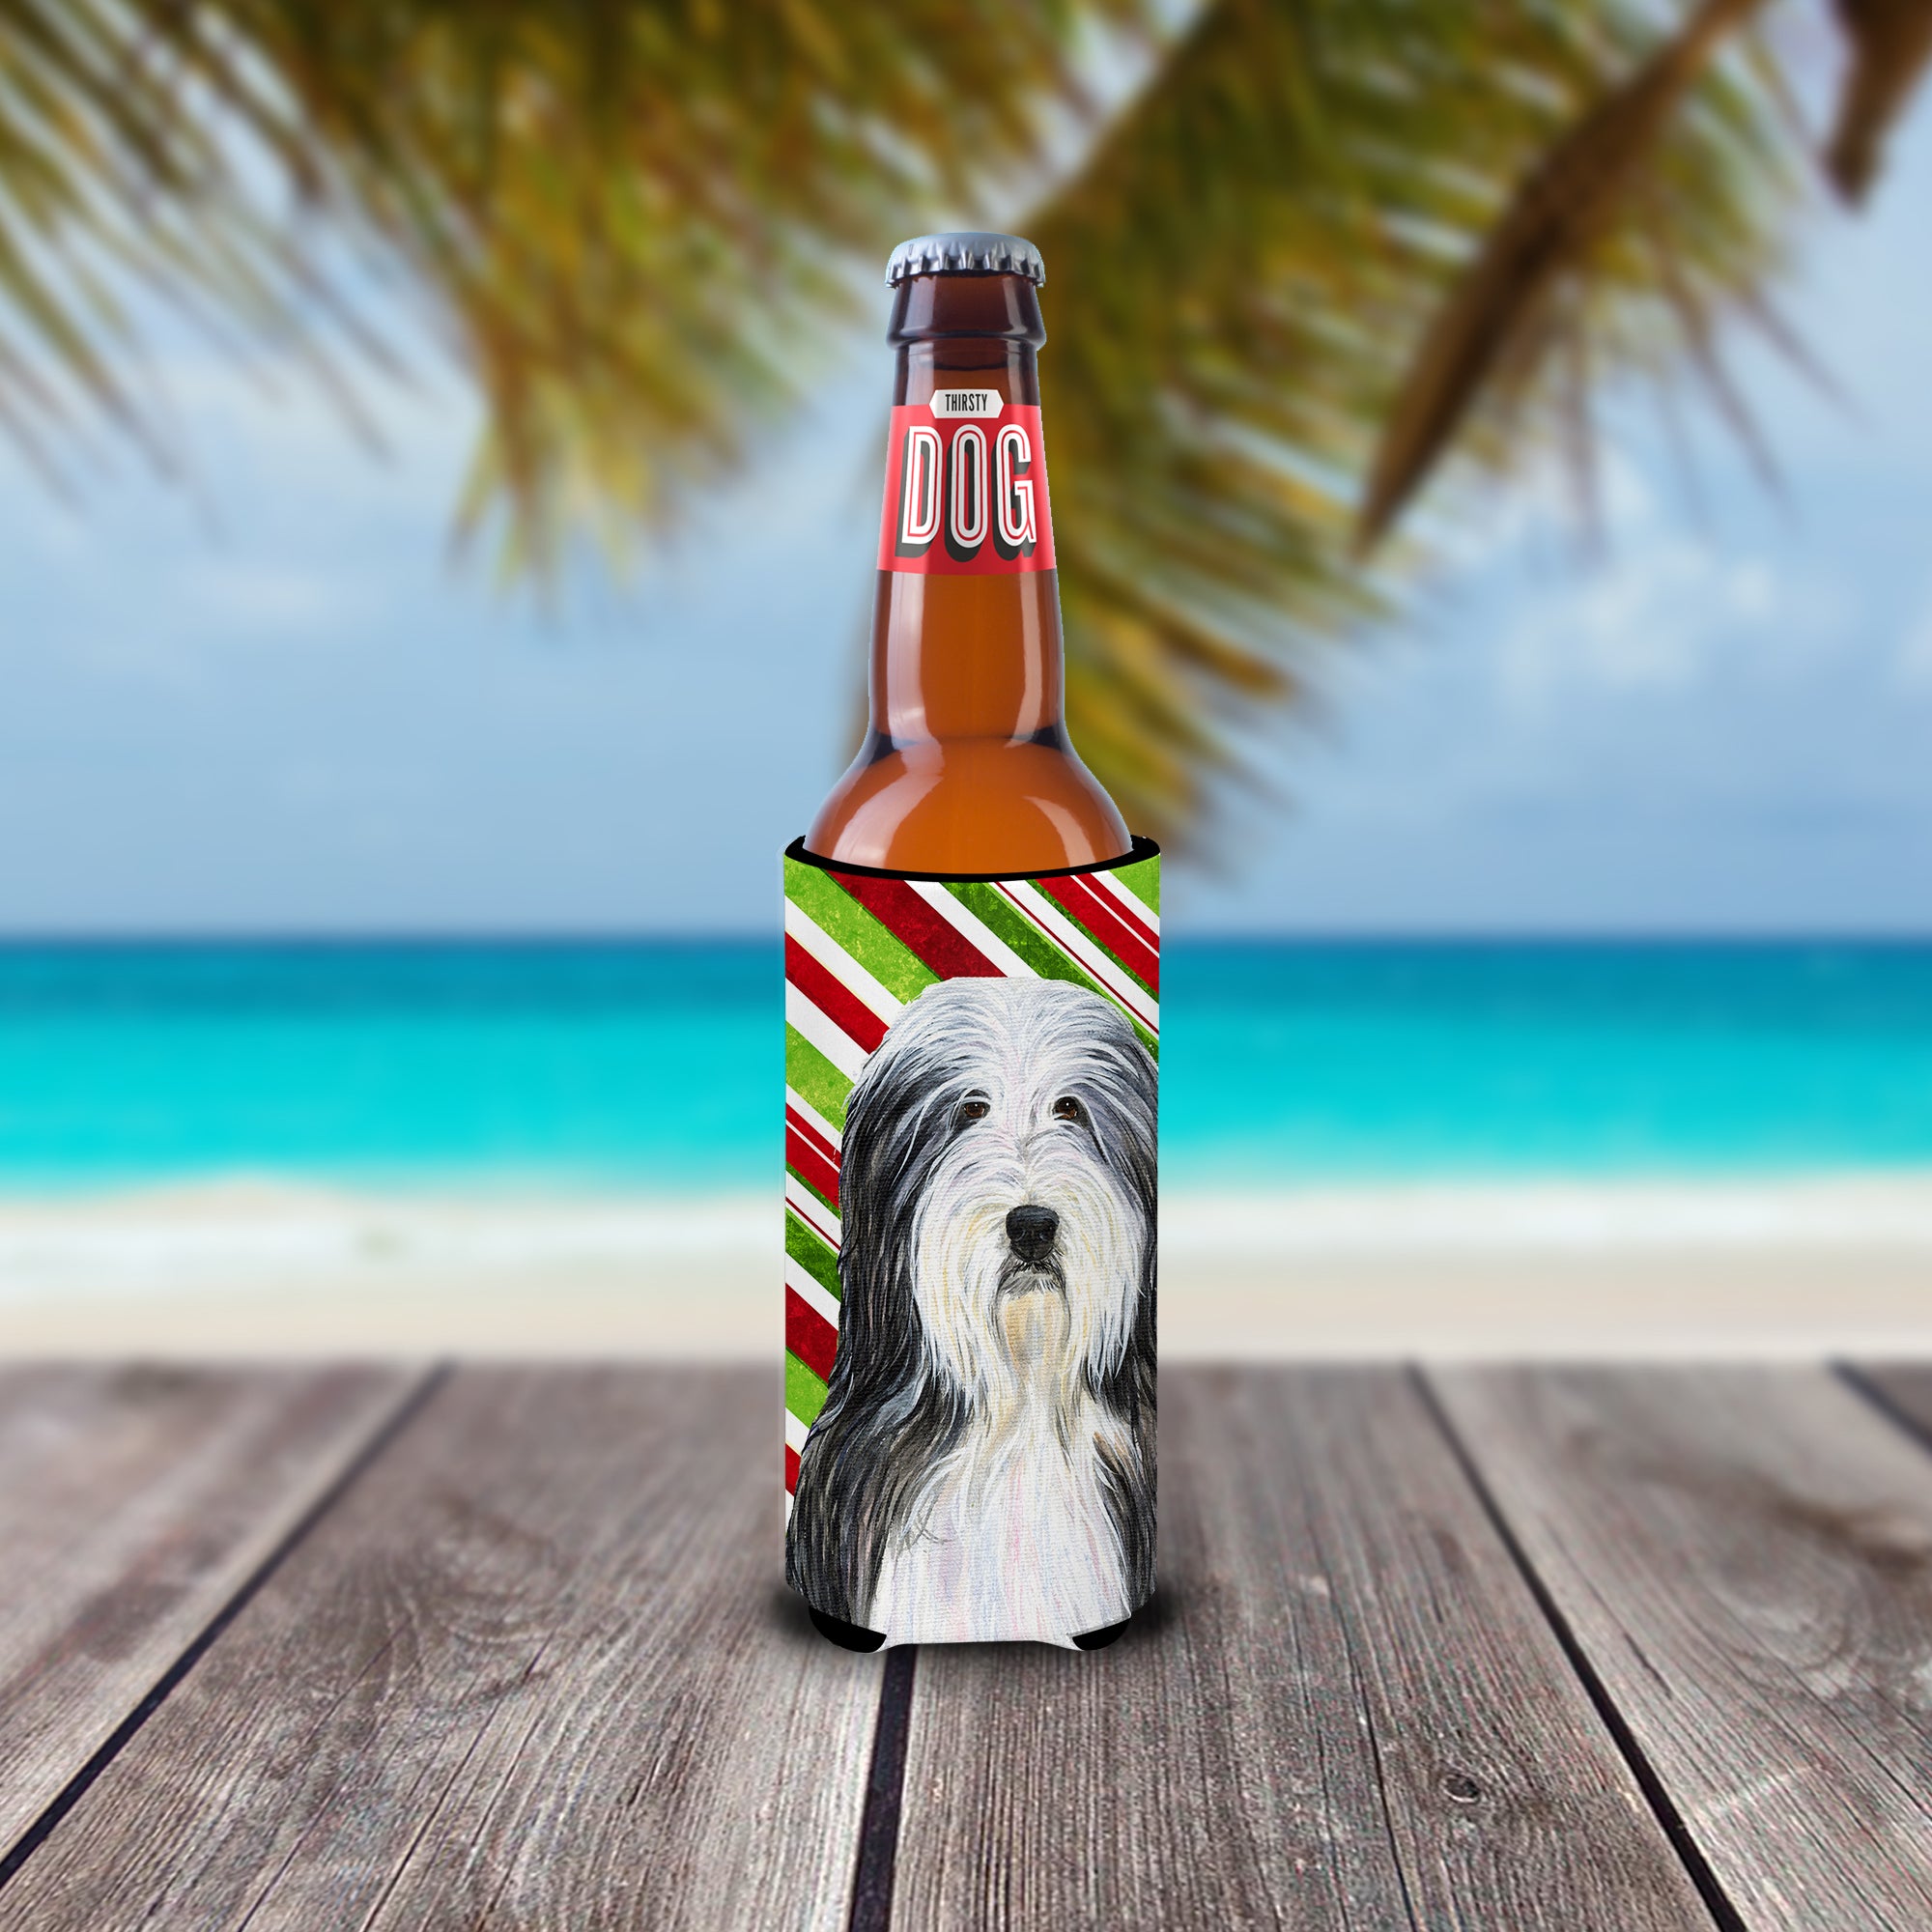 Bearded Collie Candy Cane Holiday Christmas Ultra Beverage Insulators for slim cans SS4566MUK